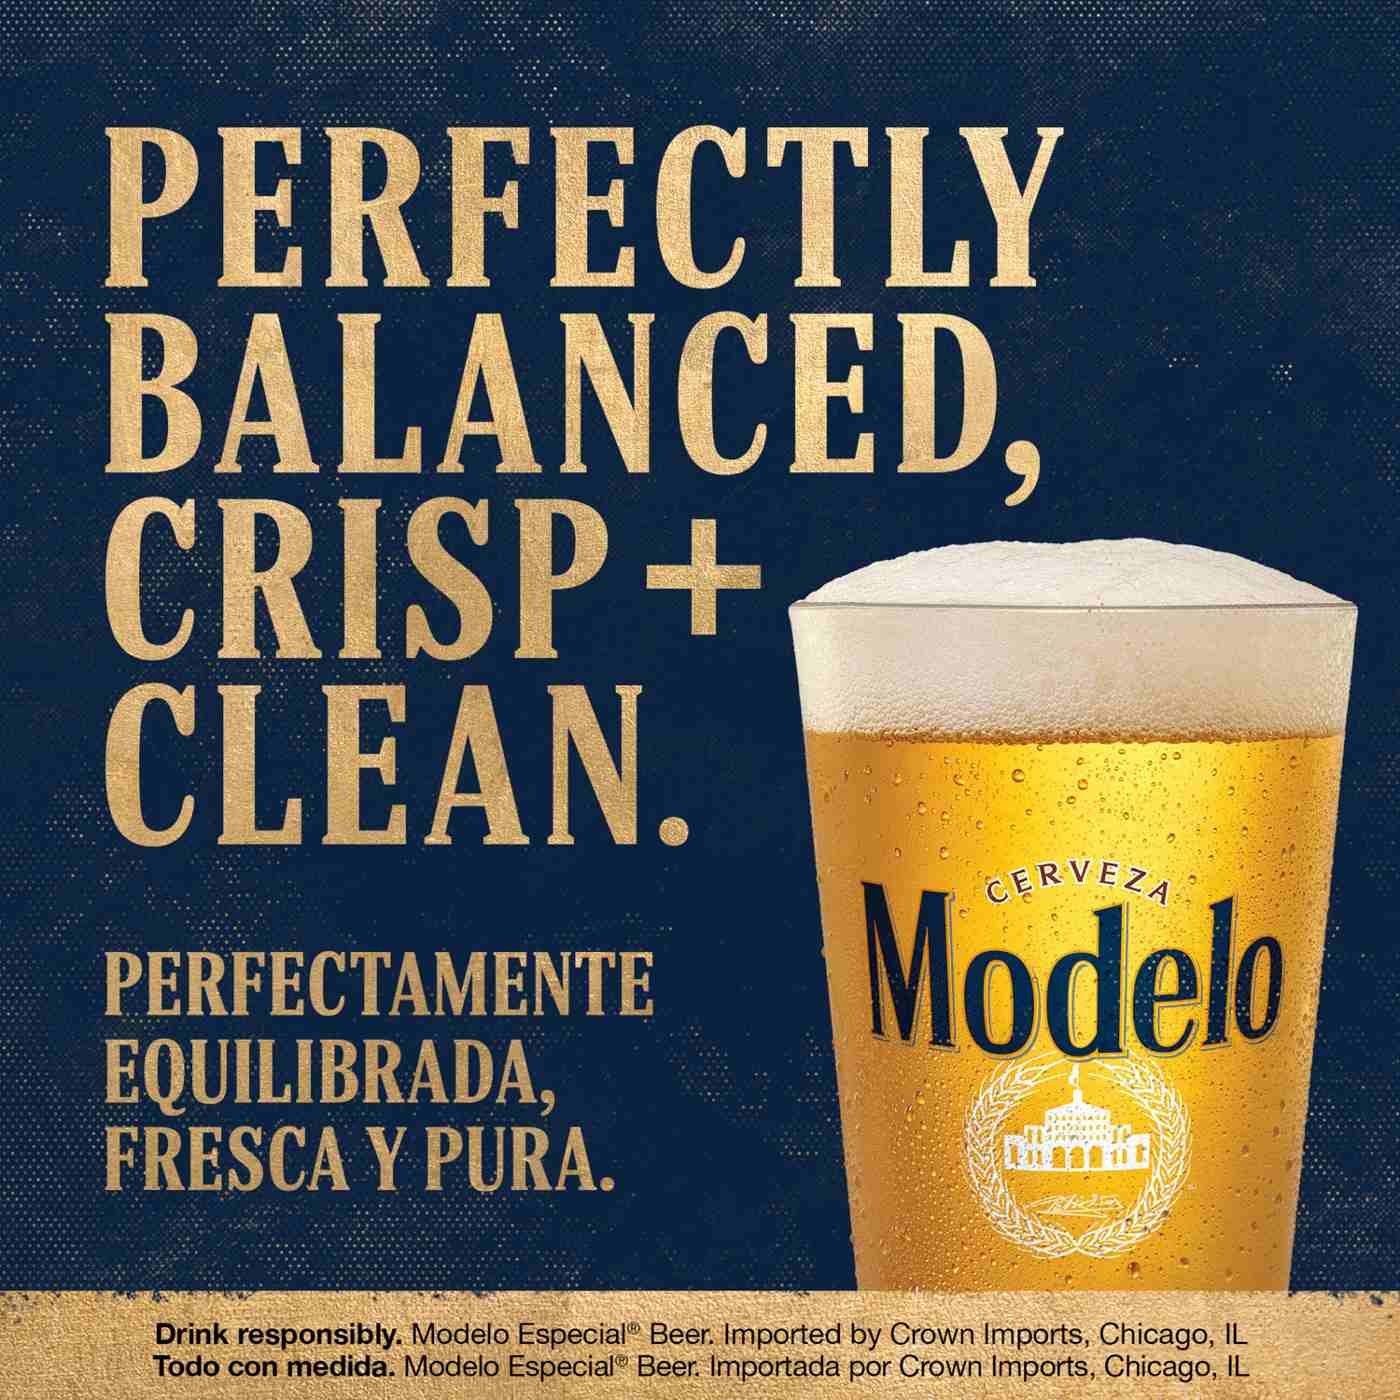 Modelo Especial Mexican Lager Import Beer 16 oz Cans, 4 pk; image 7 of 7